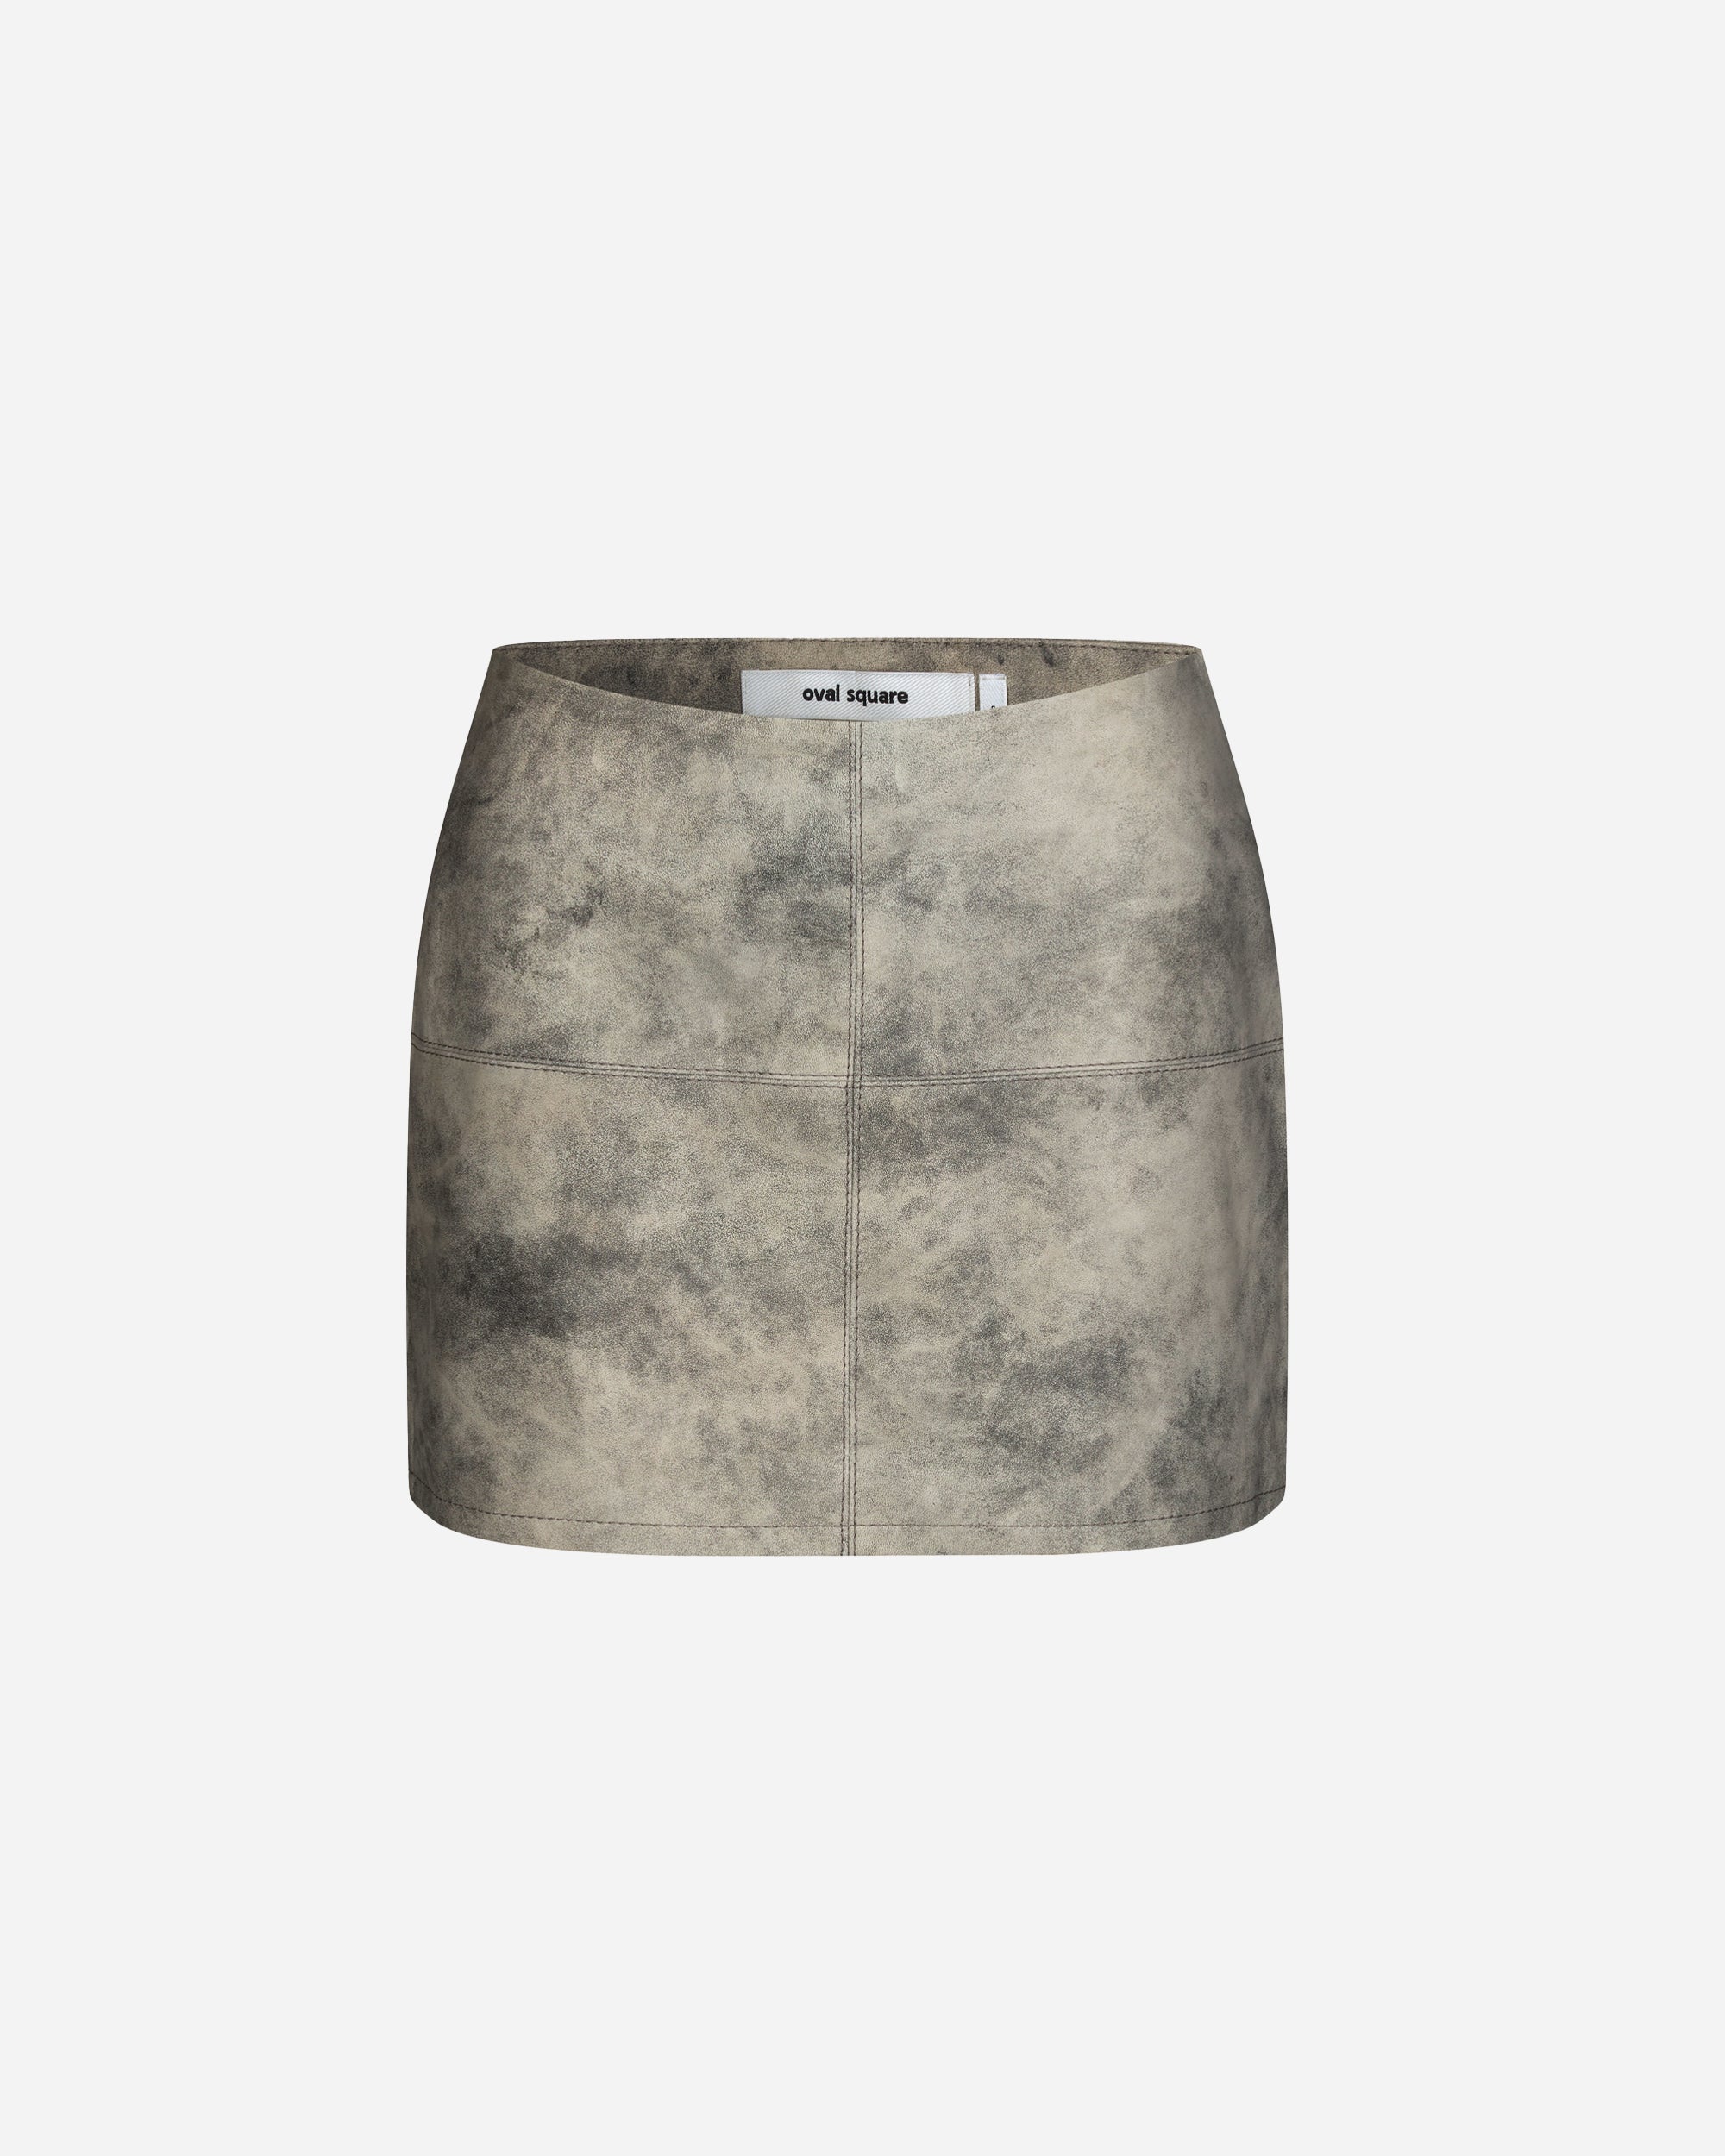 Oval Square Beat Leather Skirt Grey Stone  20700-7006